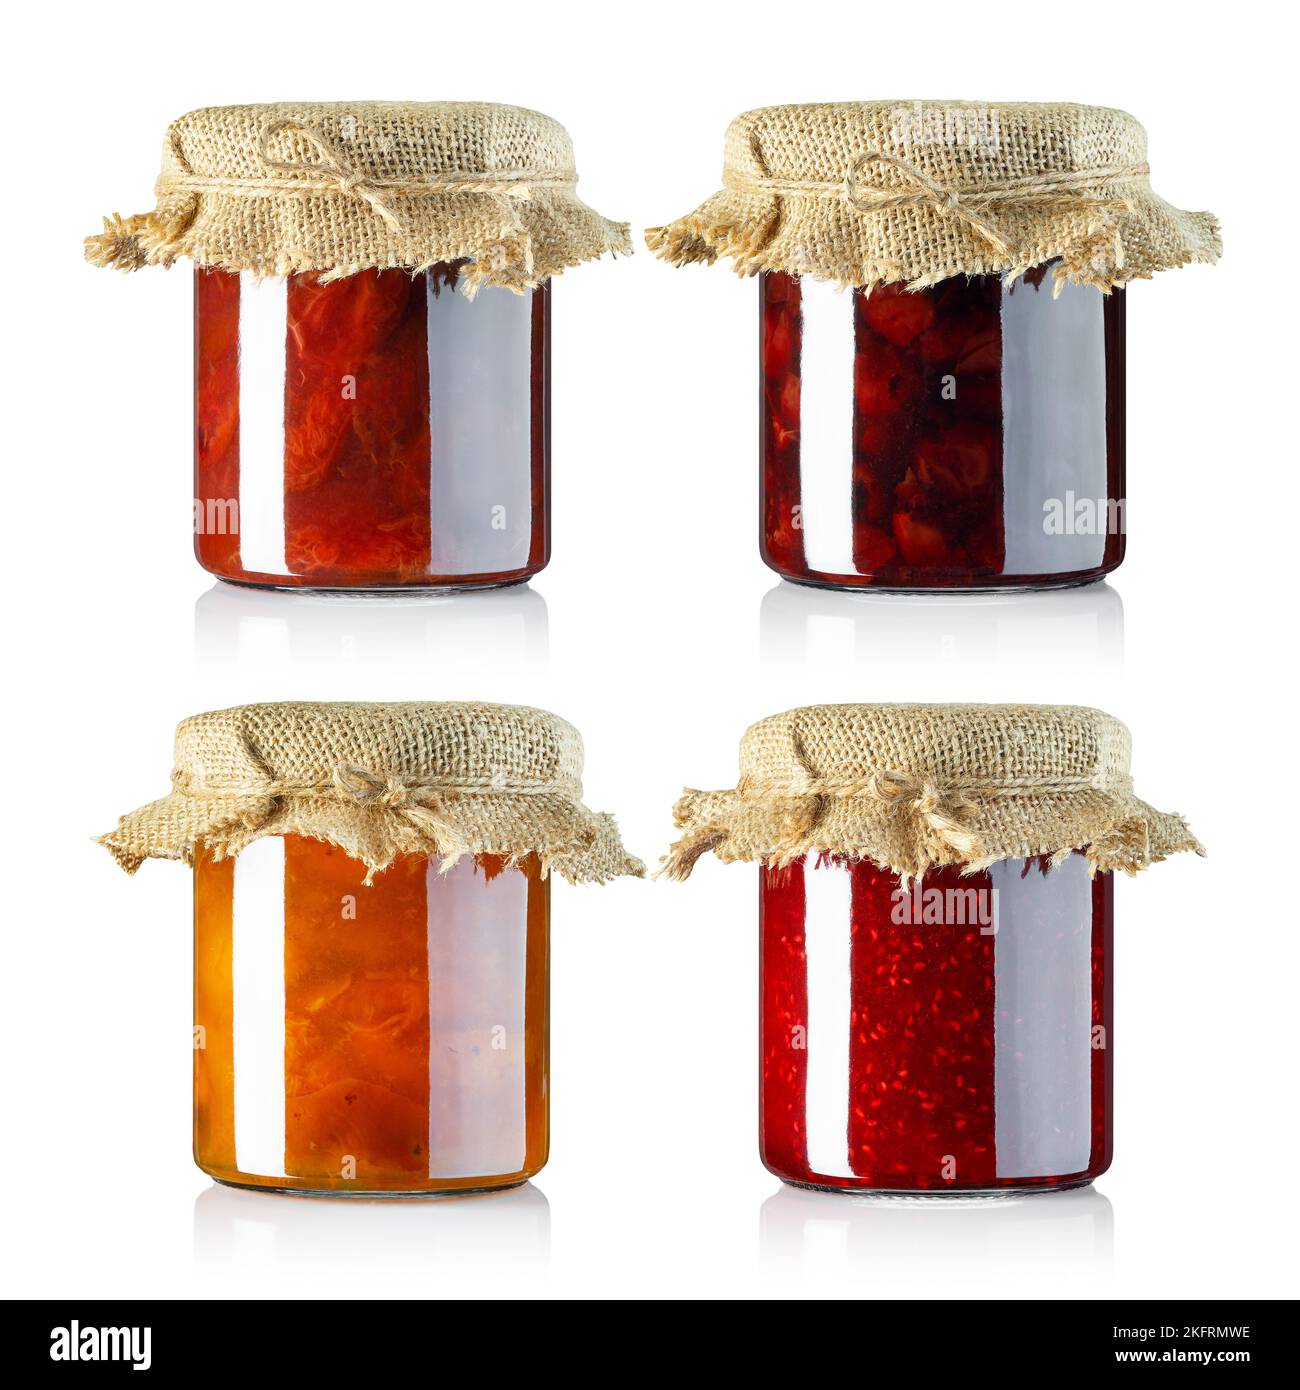 set of fruits jam in glass jars without labels covered with sackcloth isolated on white Stock Photo